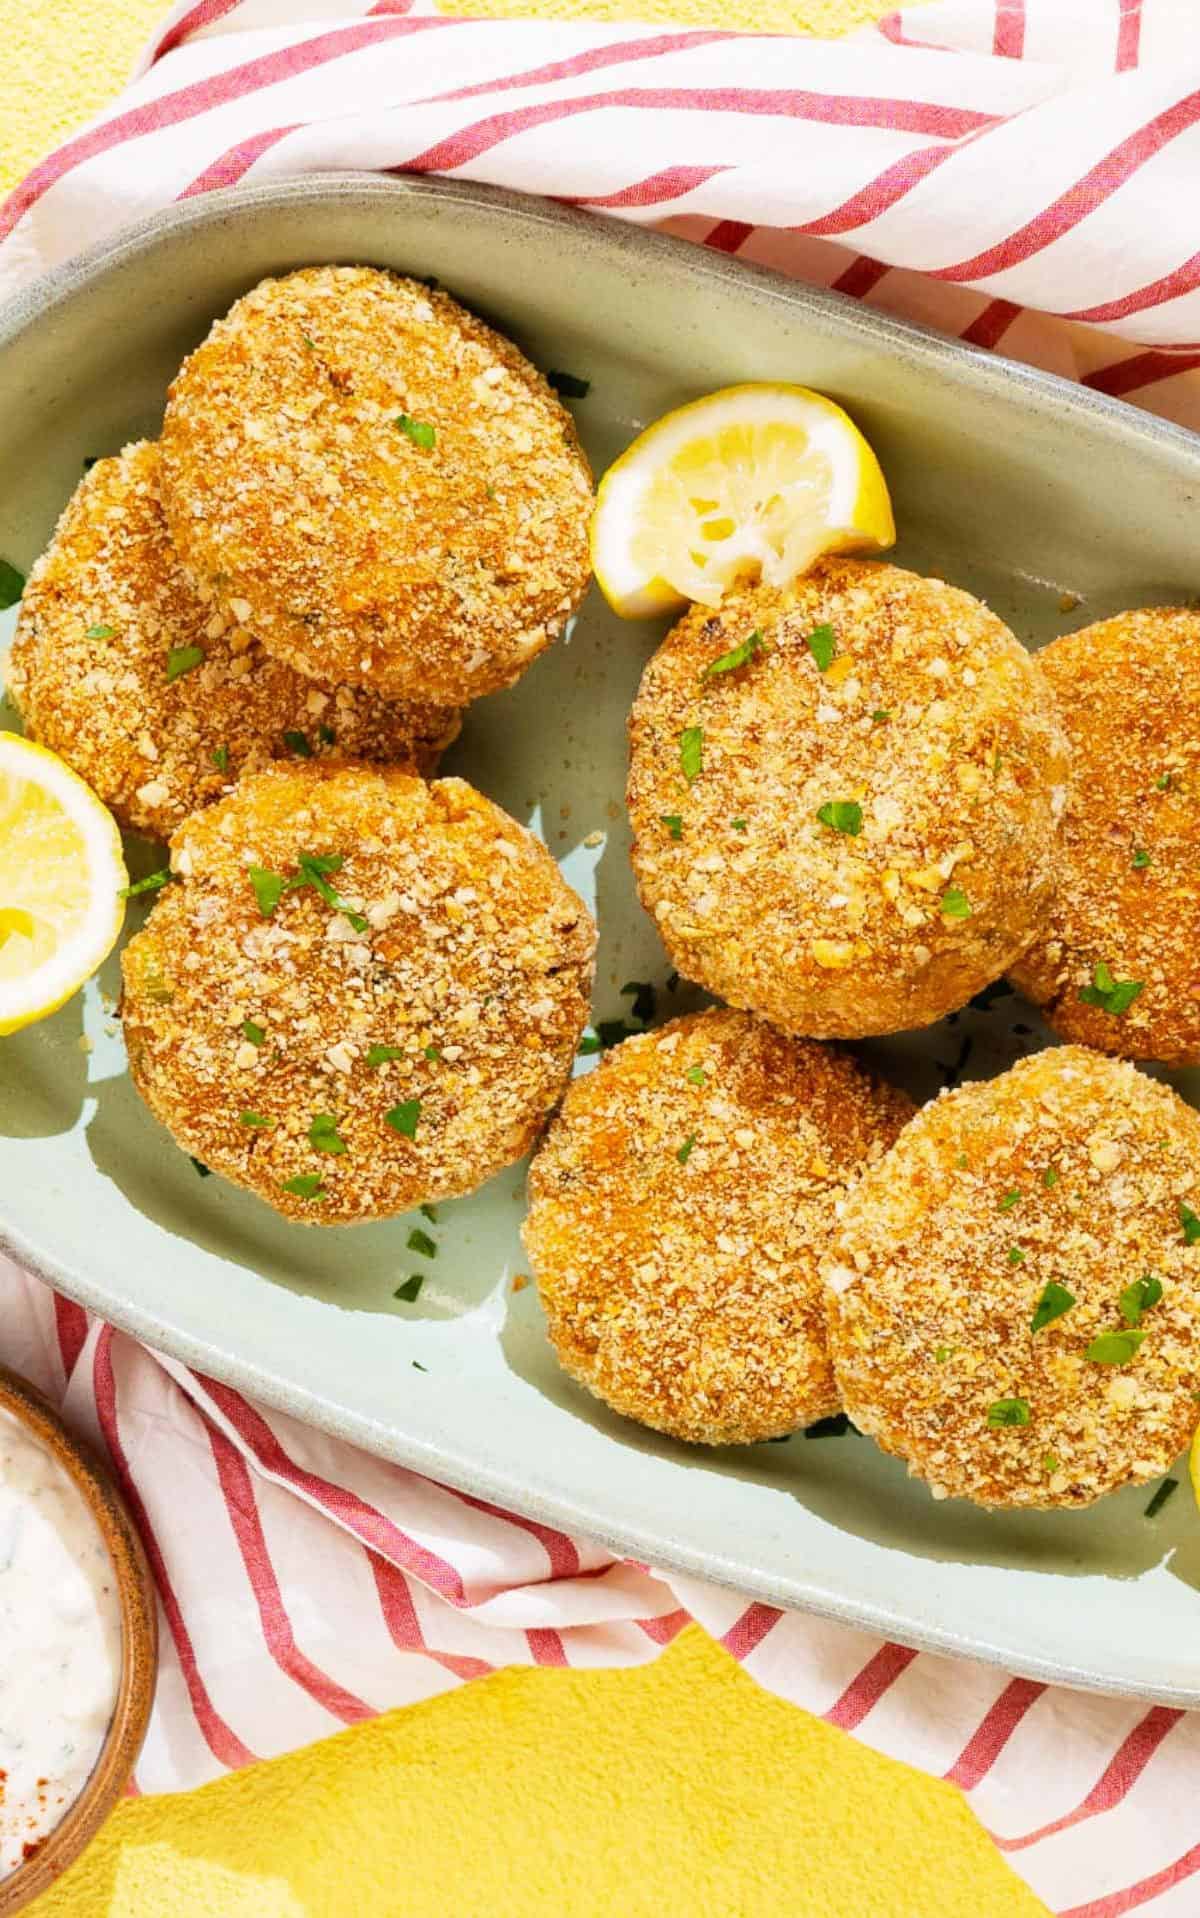 Tasty Deviled Crab Cakes Recipe with a Kick!